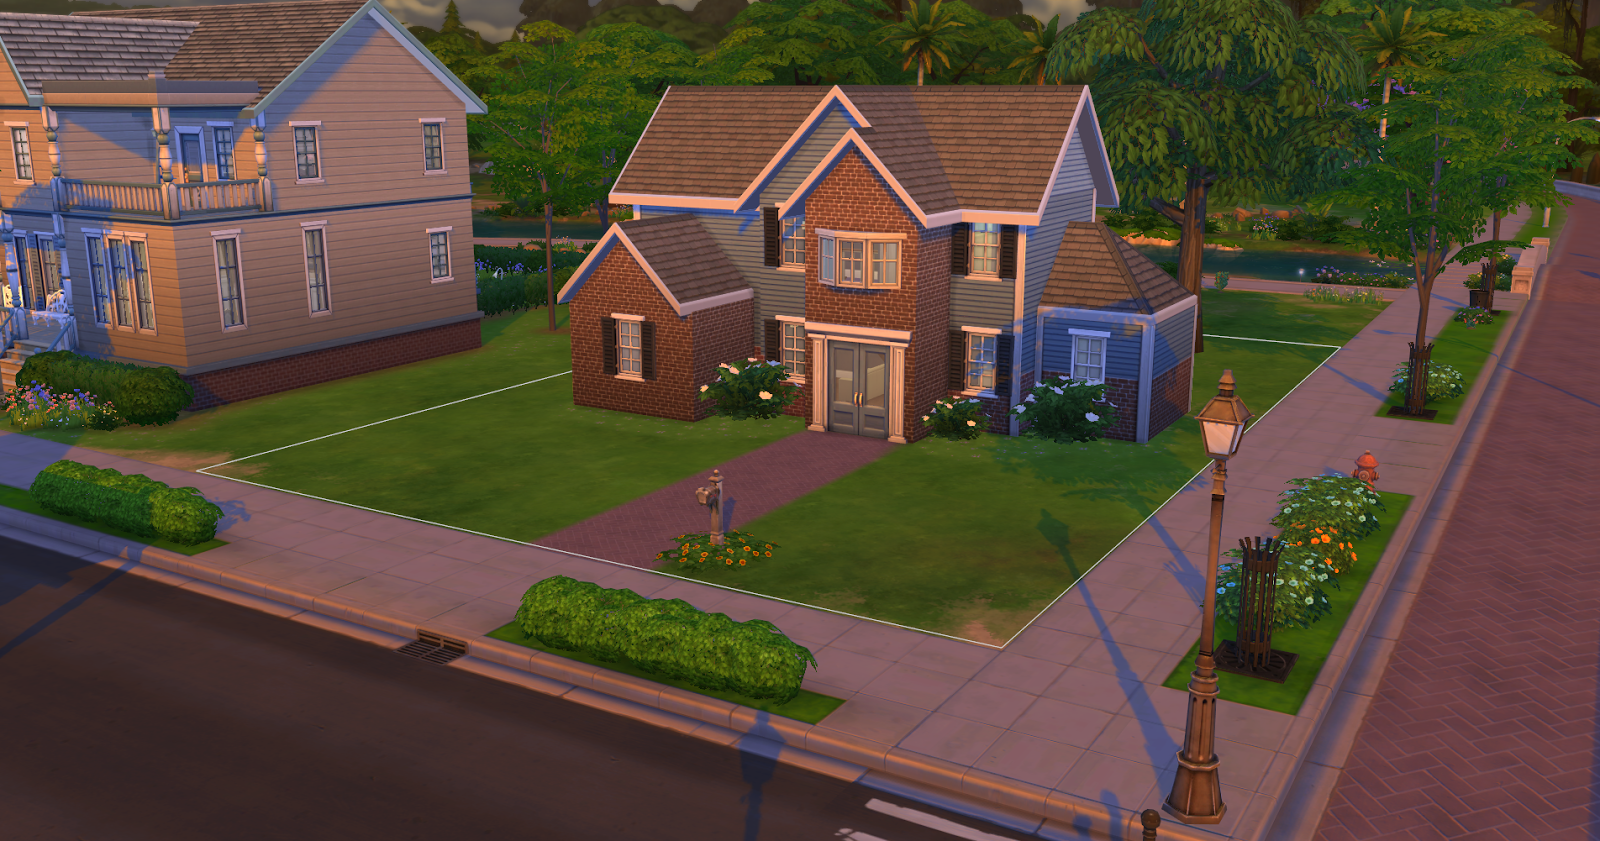 Sims 4 Builds Simple American Starter Sims 4 House